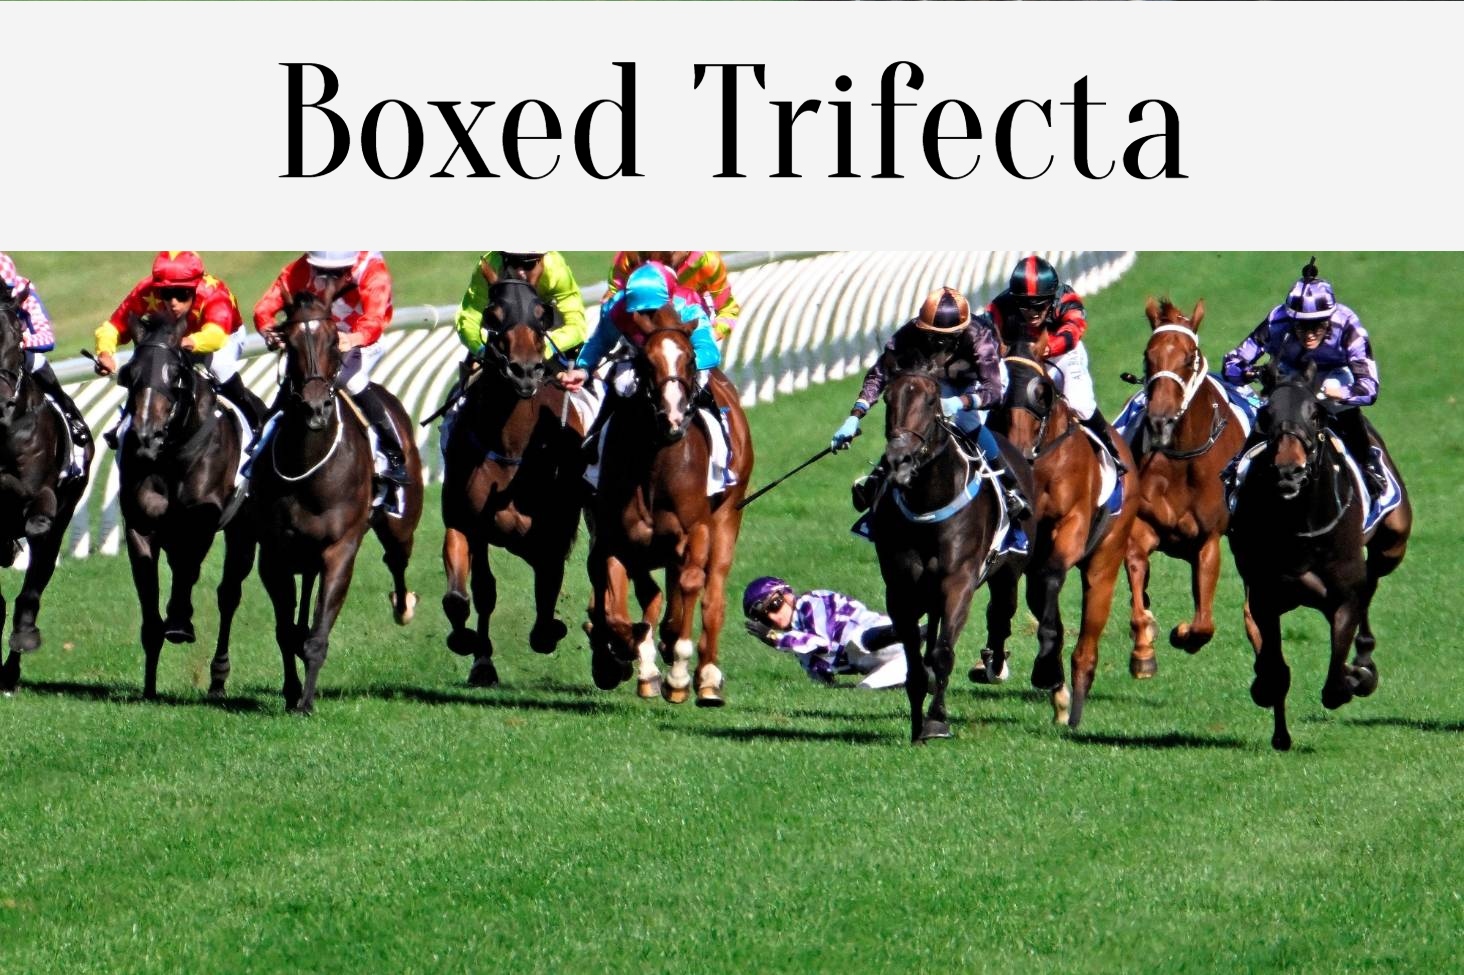 Boxed Trifecta - A Type Of Trifecta Bet In Horse Racing